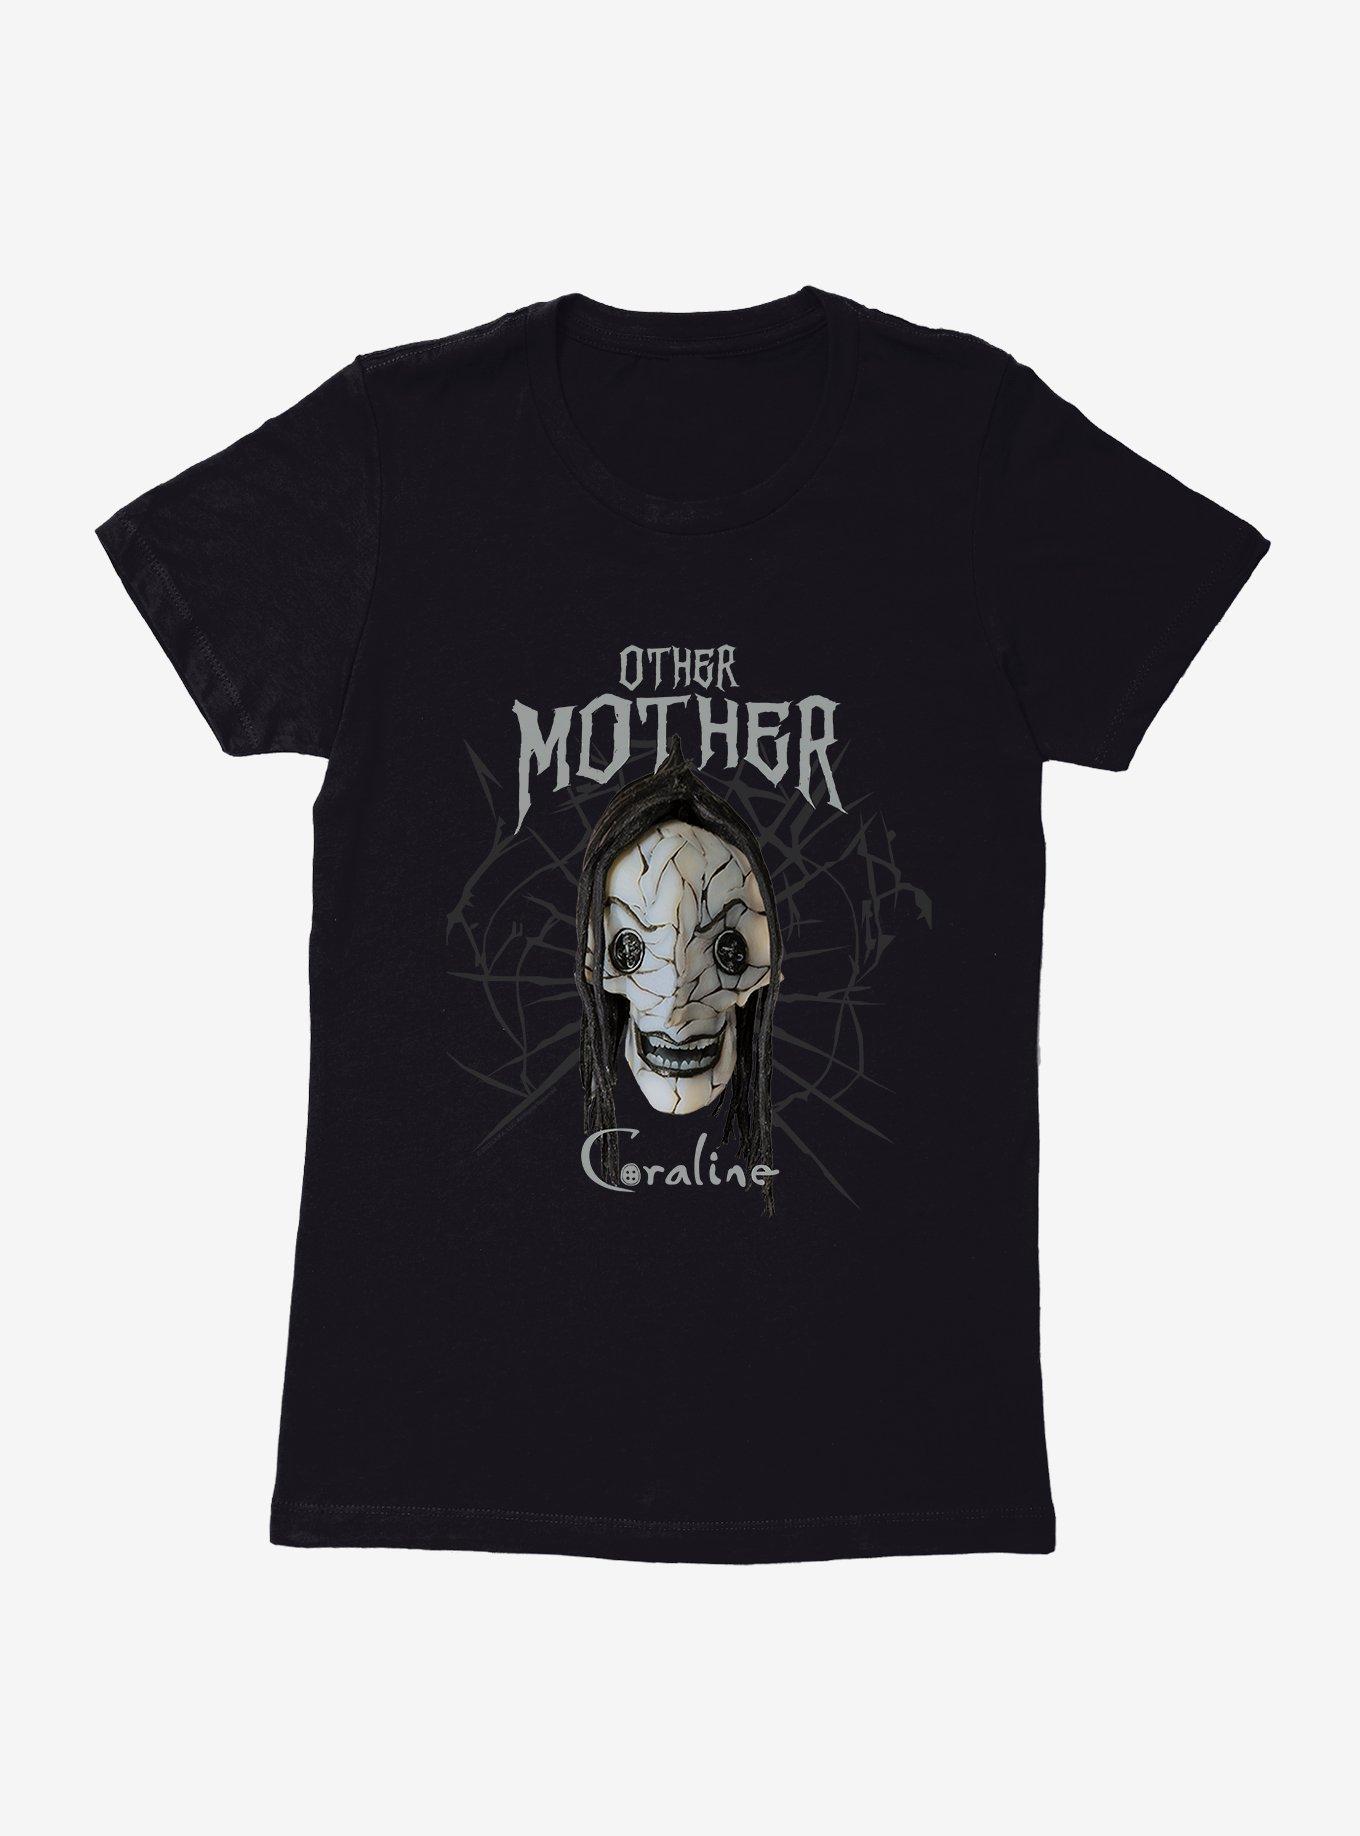 Coraline Other Mother Womens T-Shirt, BLACK, hi-res